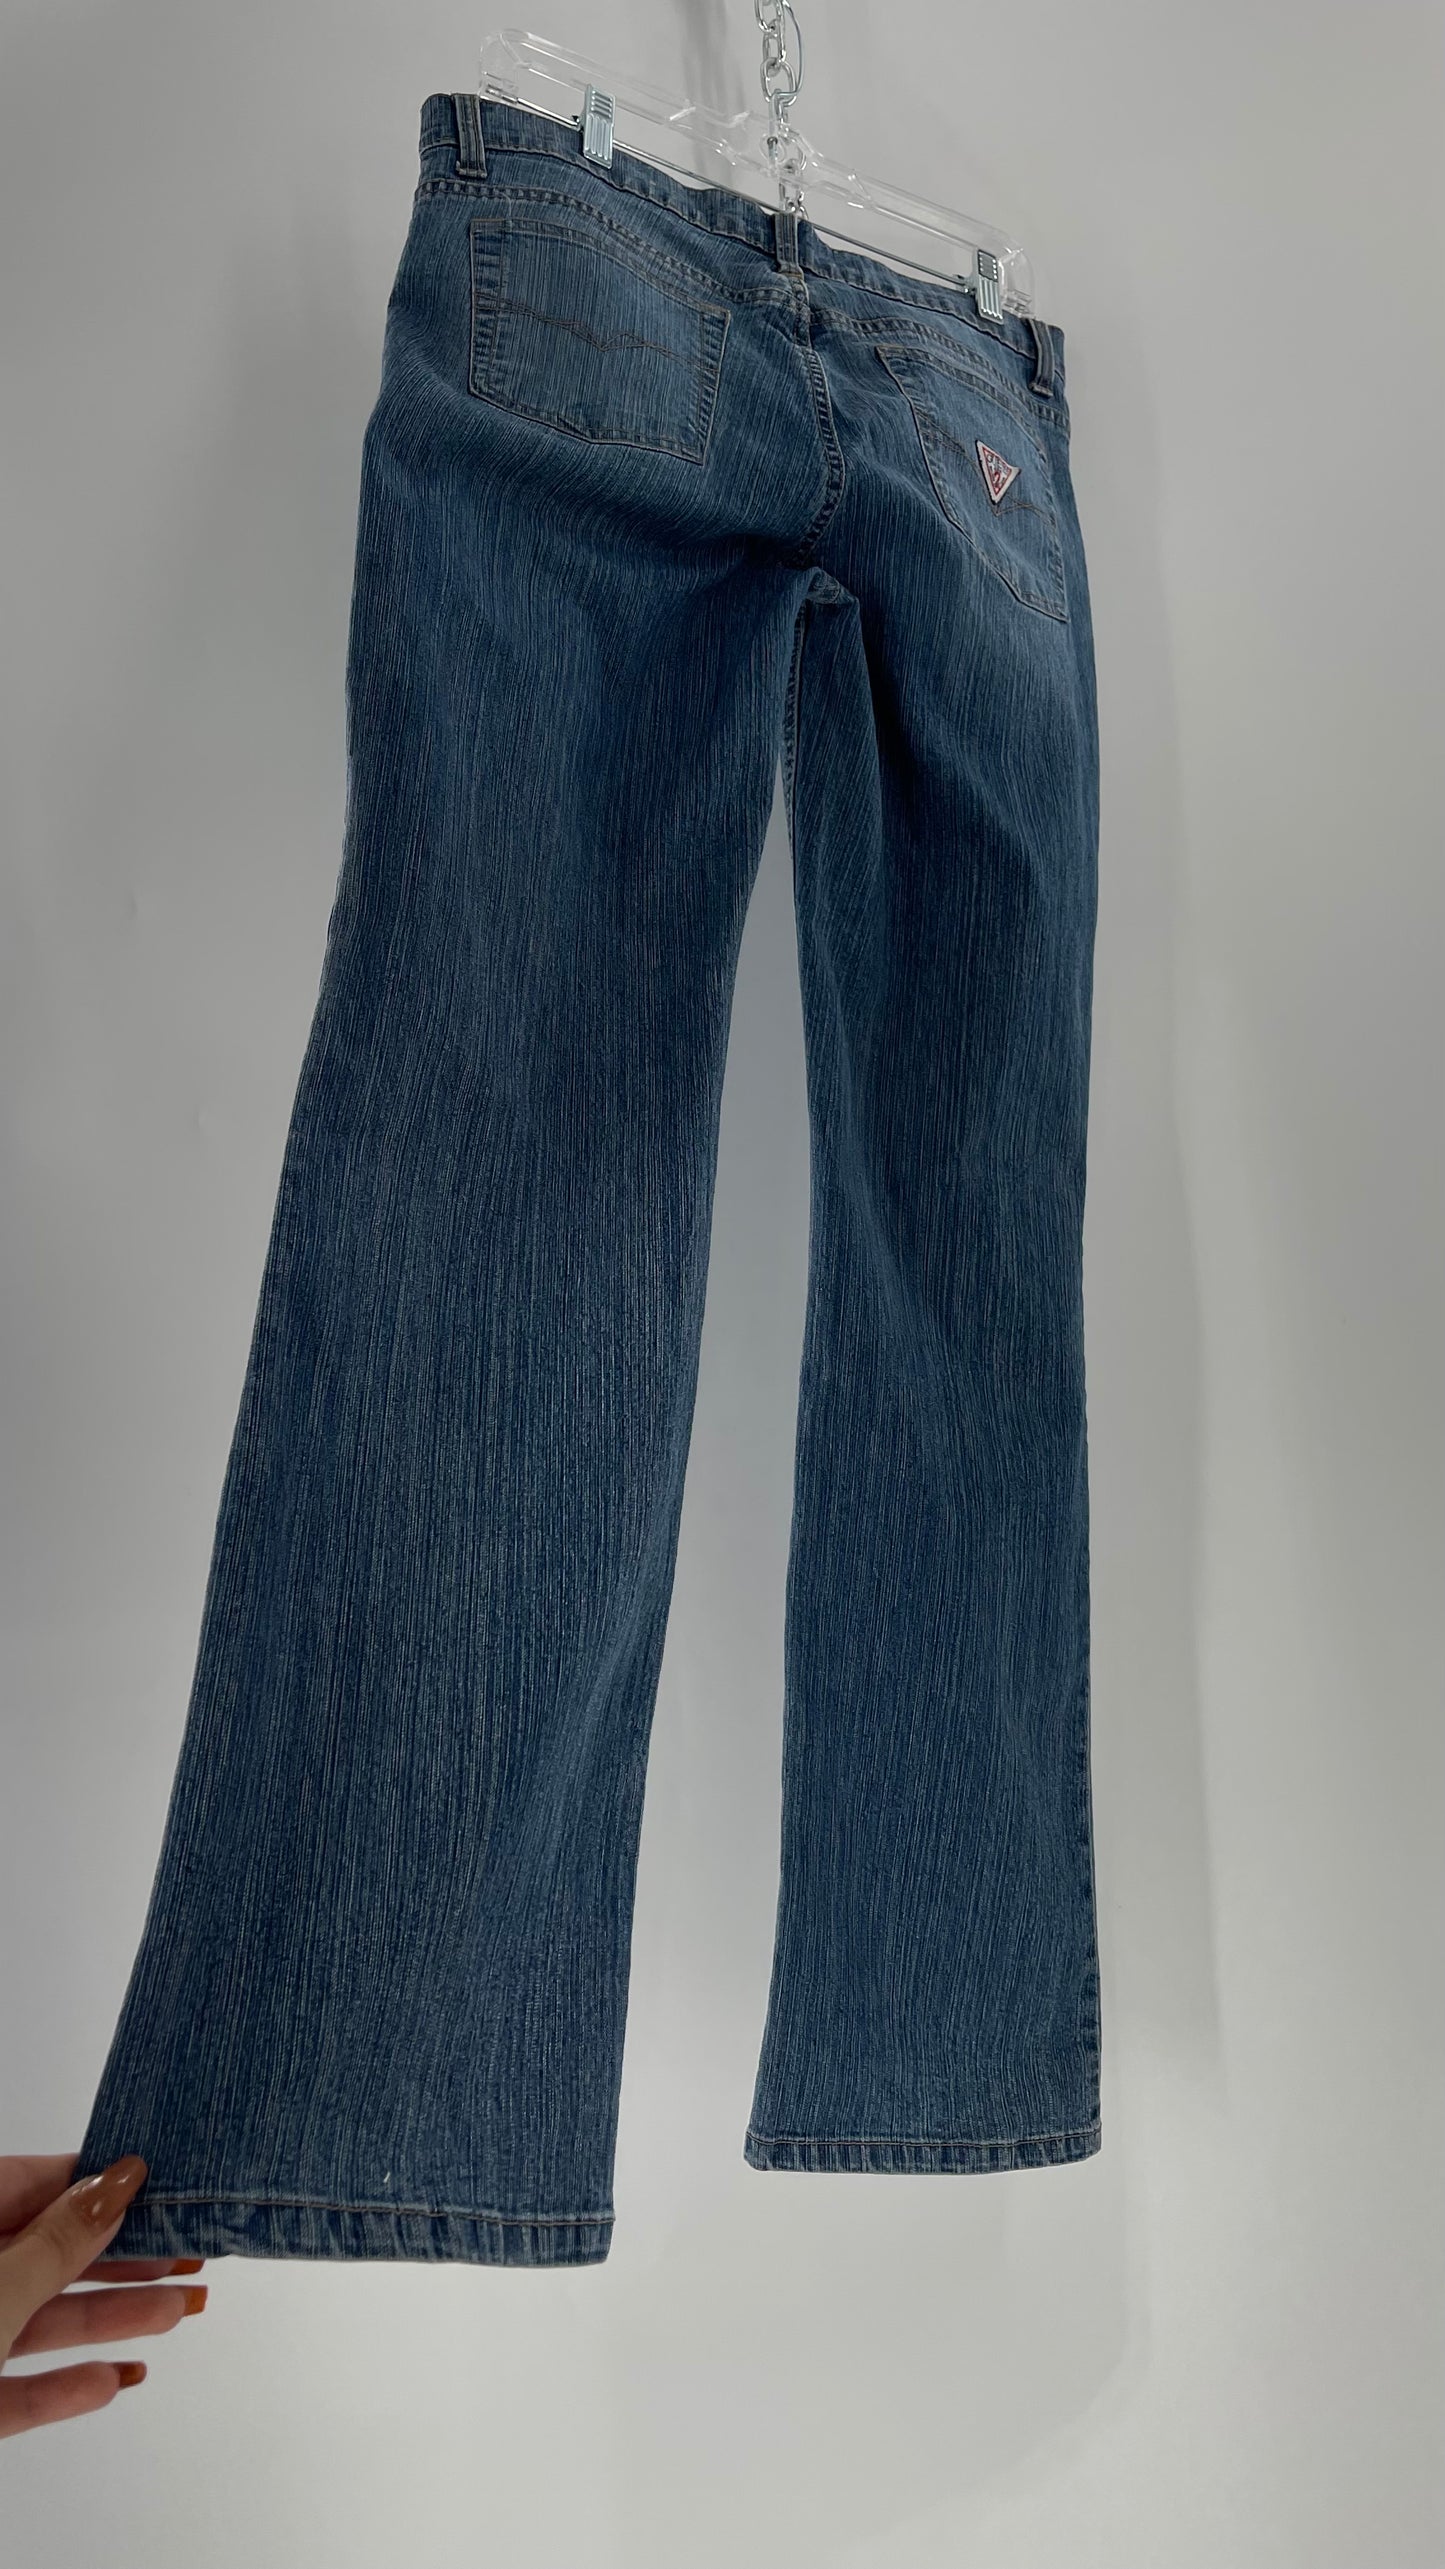 Vintage GUESS JEANS Stone Washed Straight Leg Jeans (W30L32)